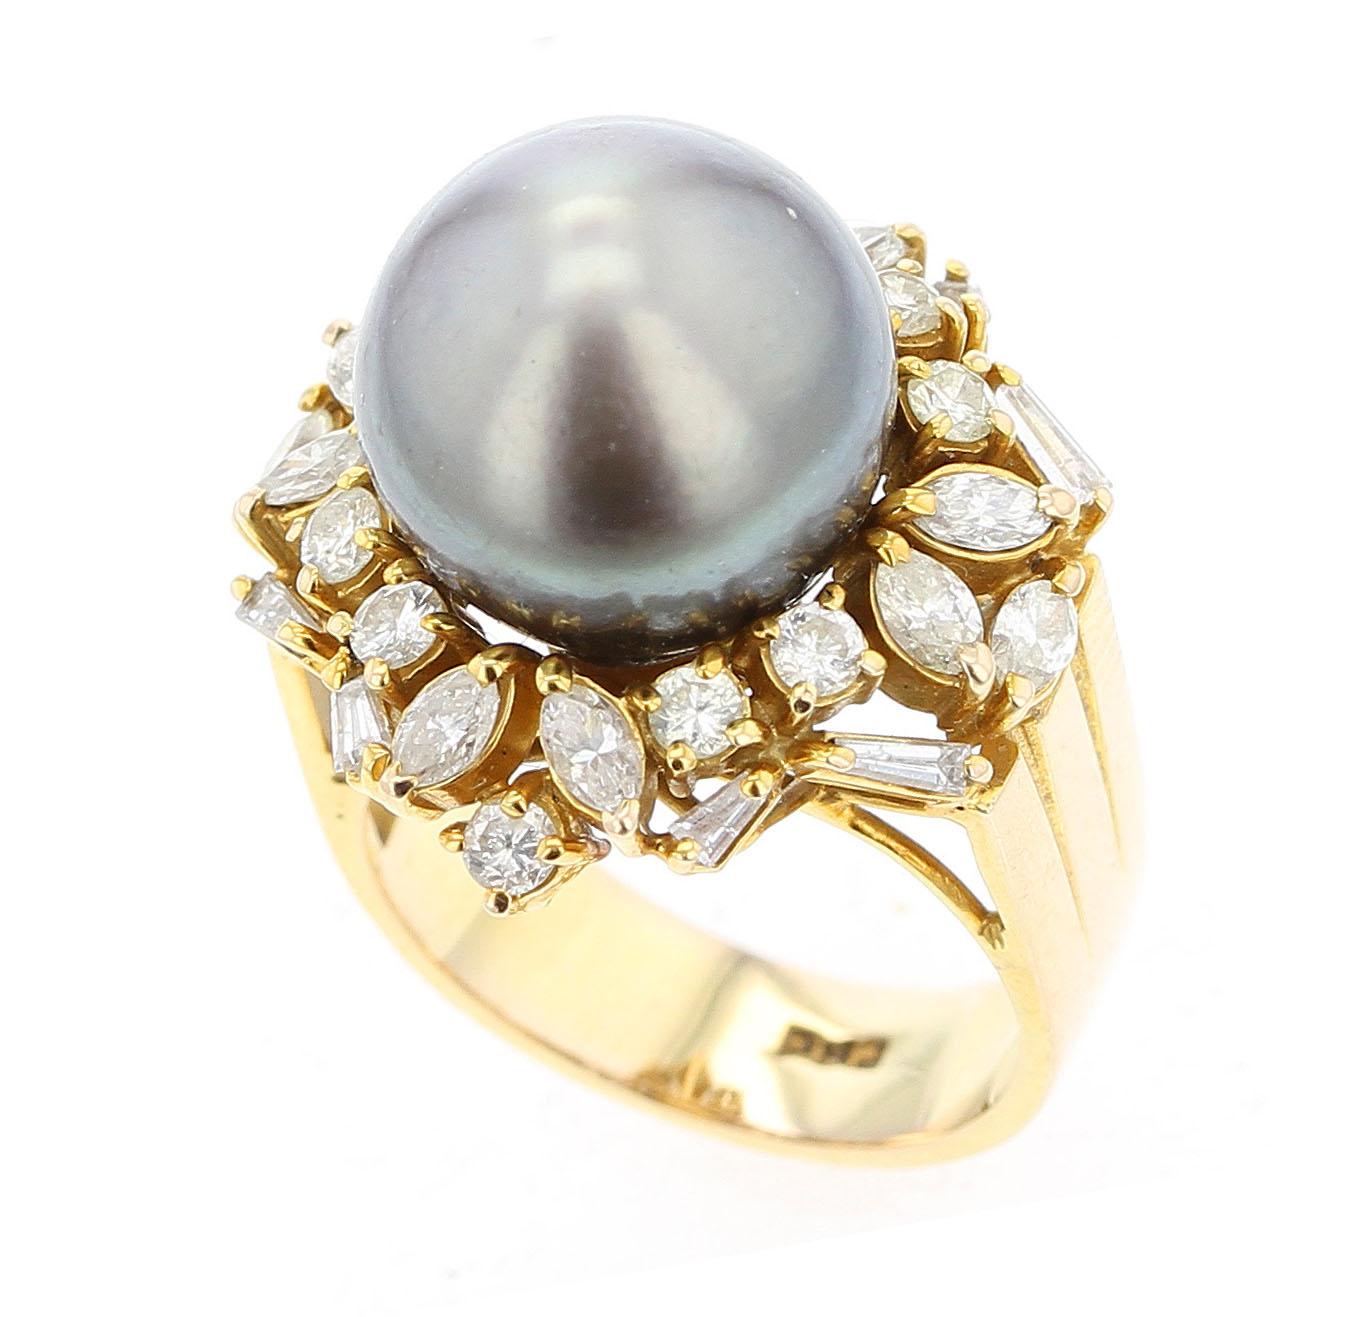 A bold ring consisting of Gray Tahitian Cultured Pearl (appx. 12.7MM) set with 10 round diamonds, 10 marquise diamonds, and 8 baguette diamonds. Ring Size US 5. Stamped 585. 14K Yellow Gold.